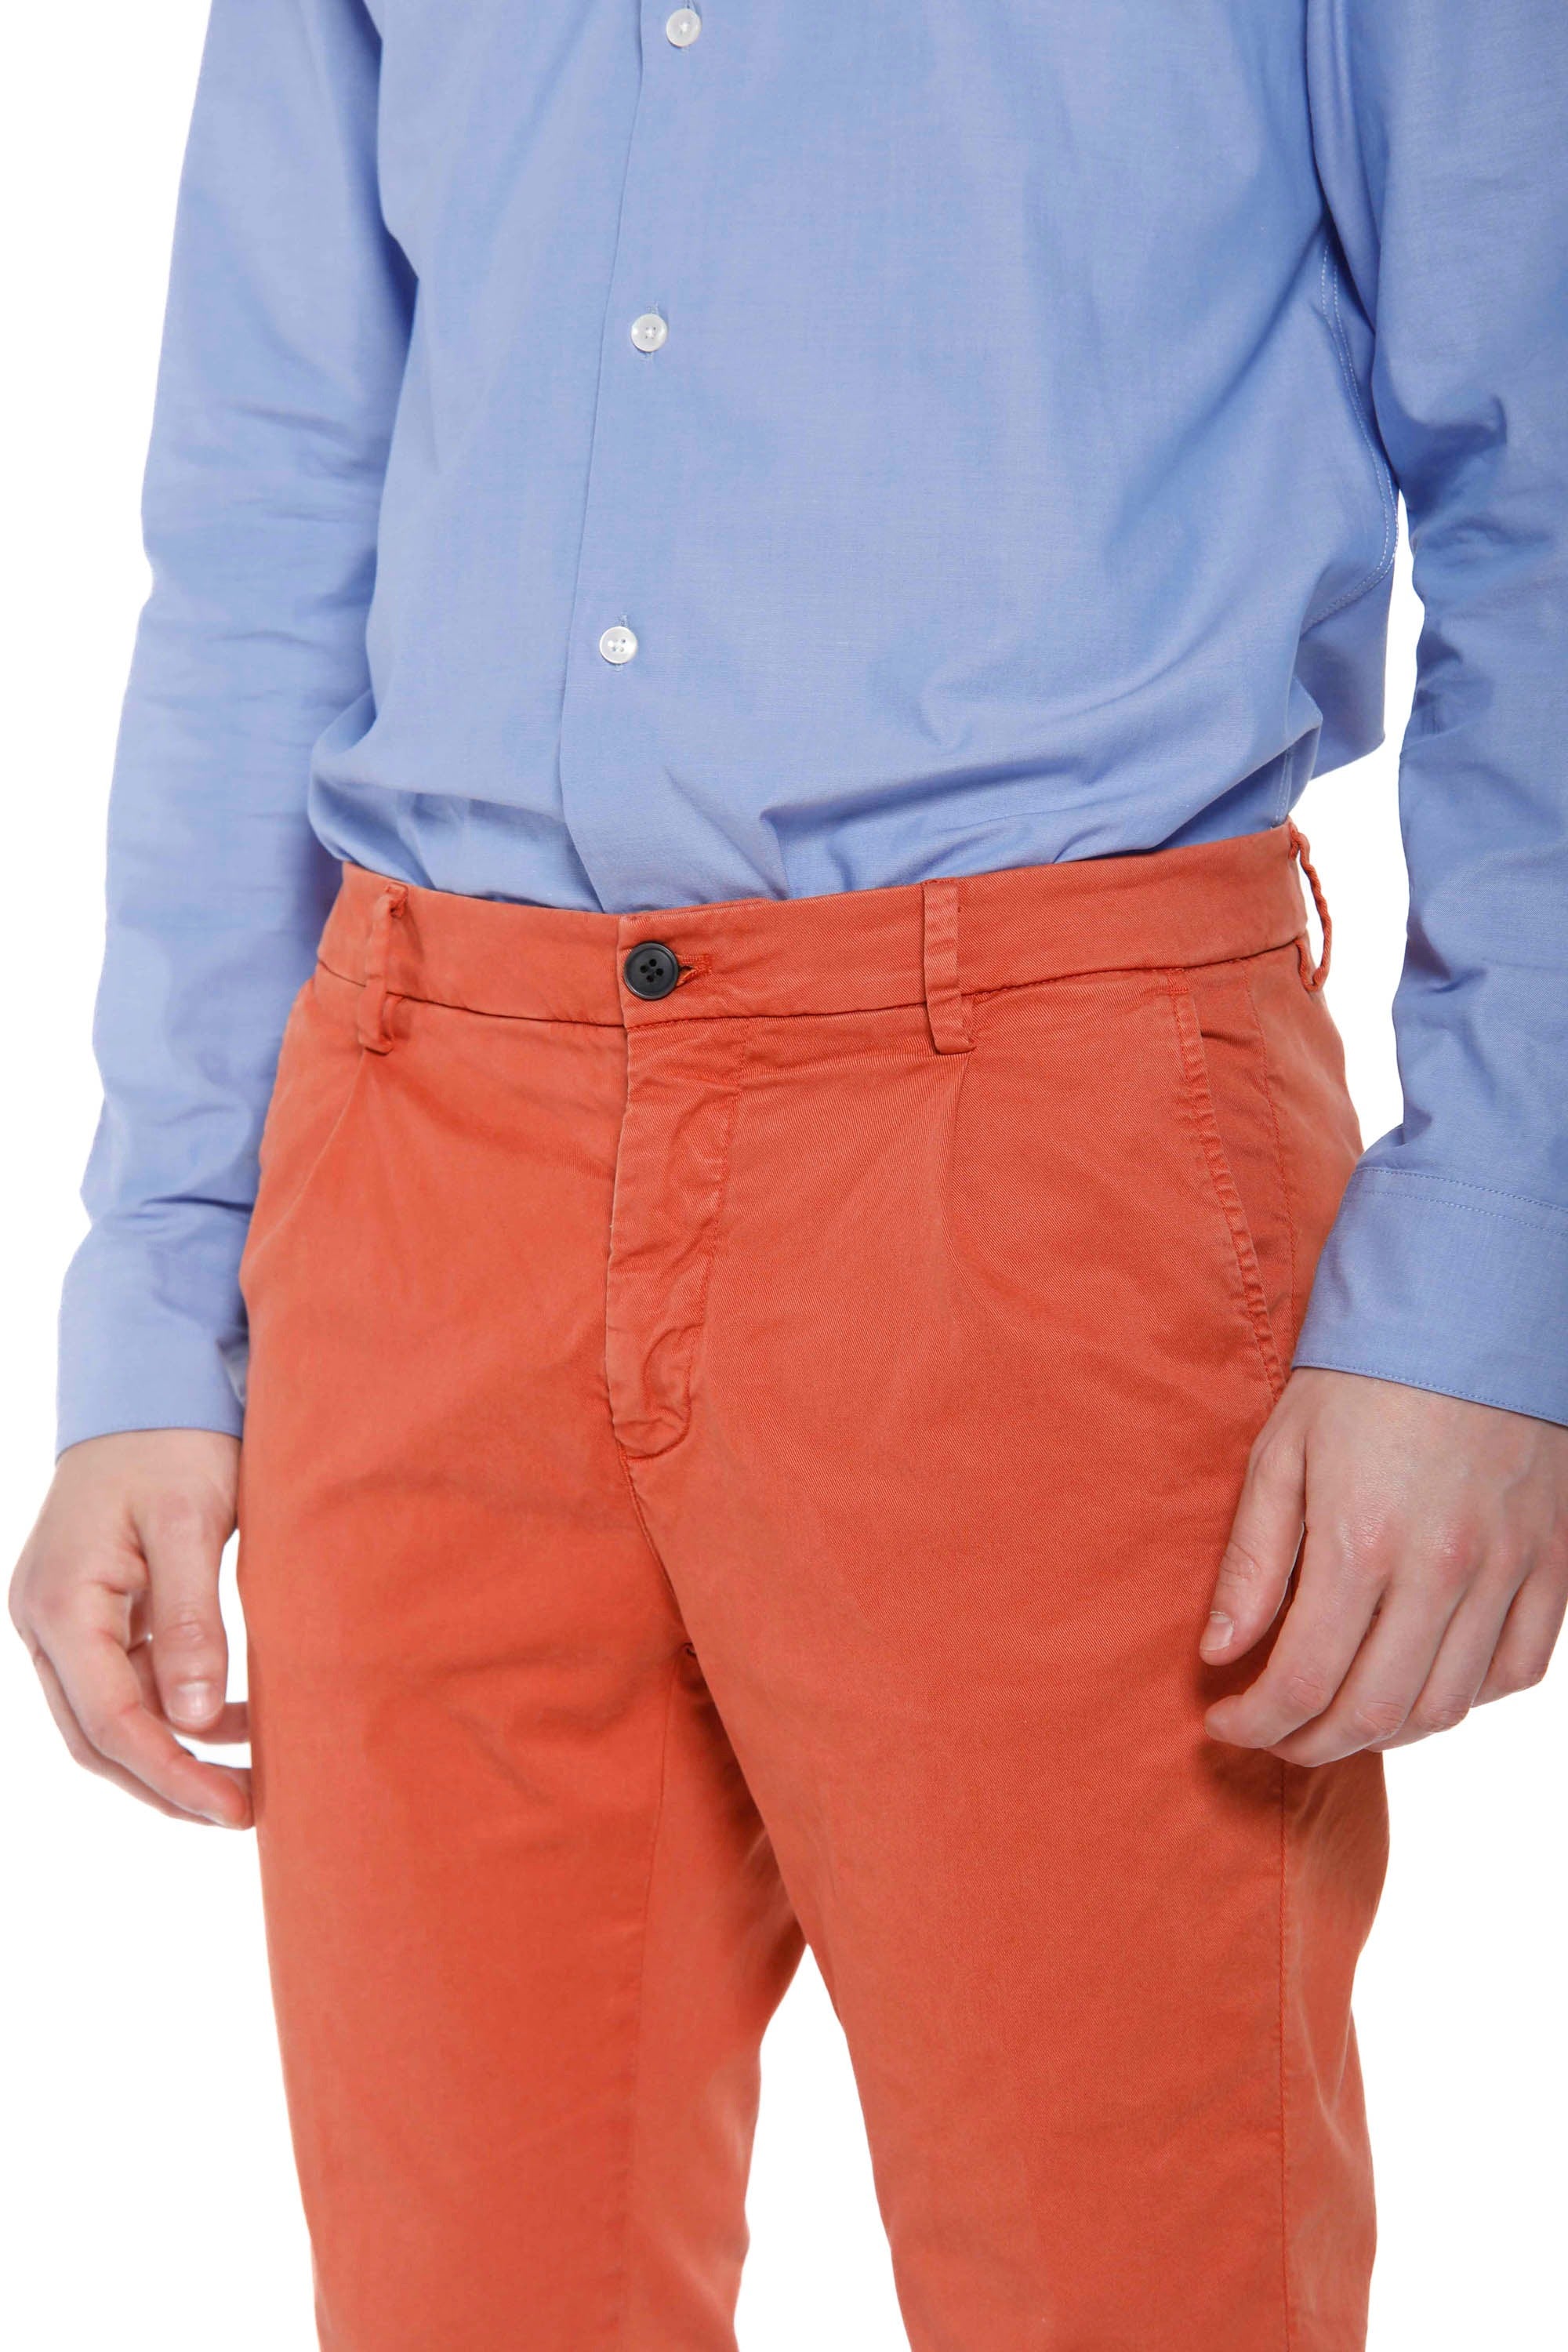 Osaka 1 Pinces man chino pants in cotton and tencel carrot